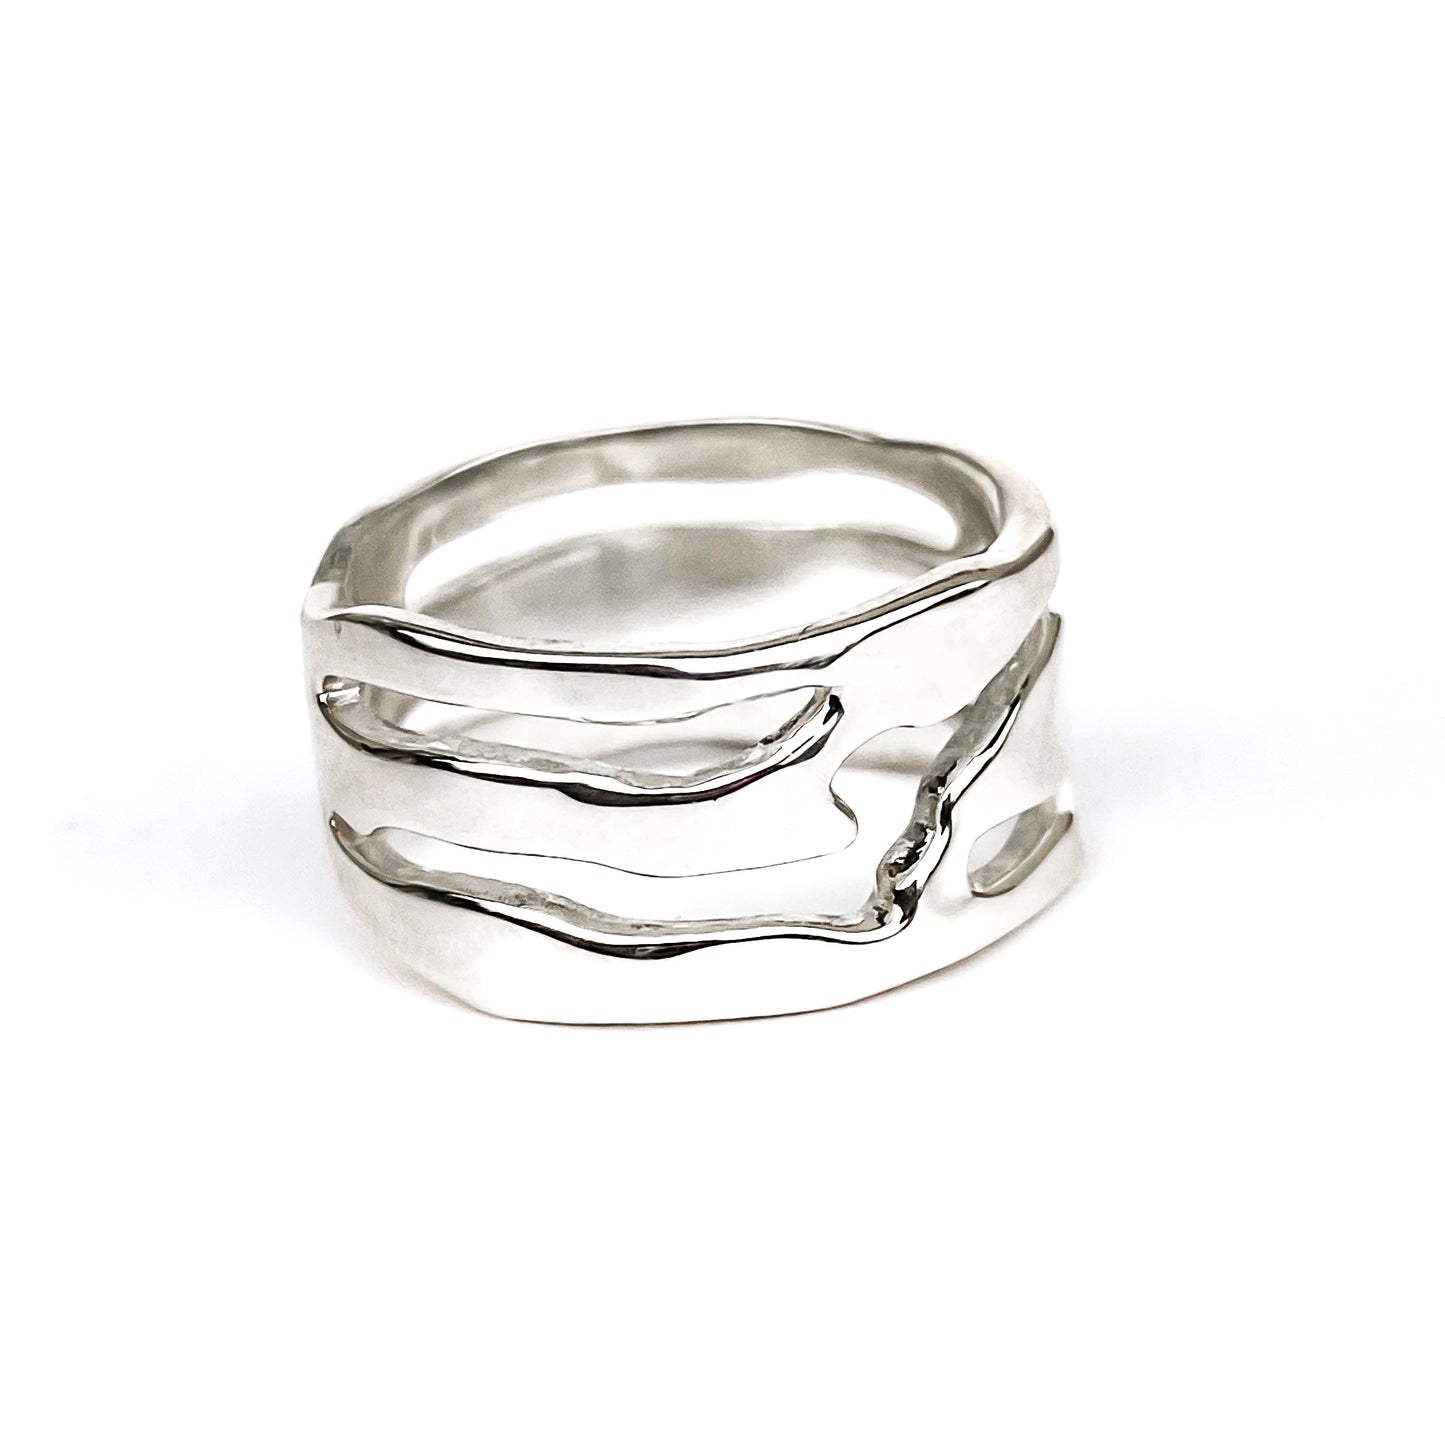 Organic Design Wide Sterling Silver Ring